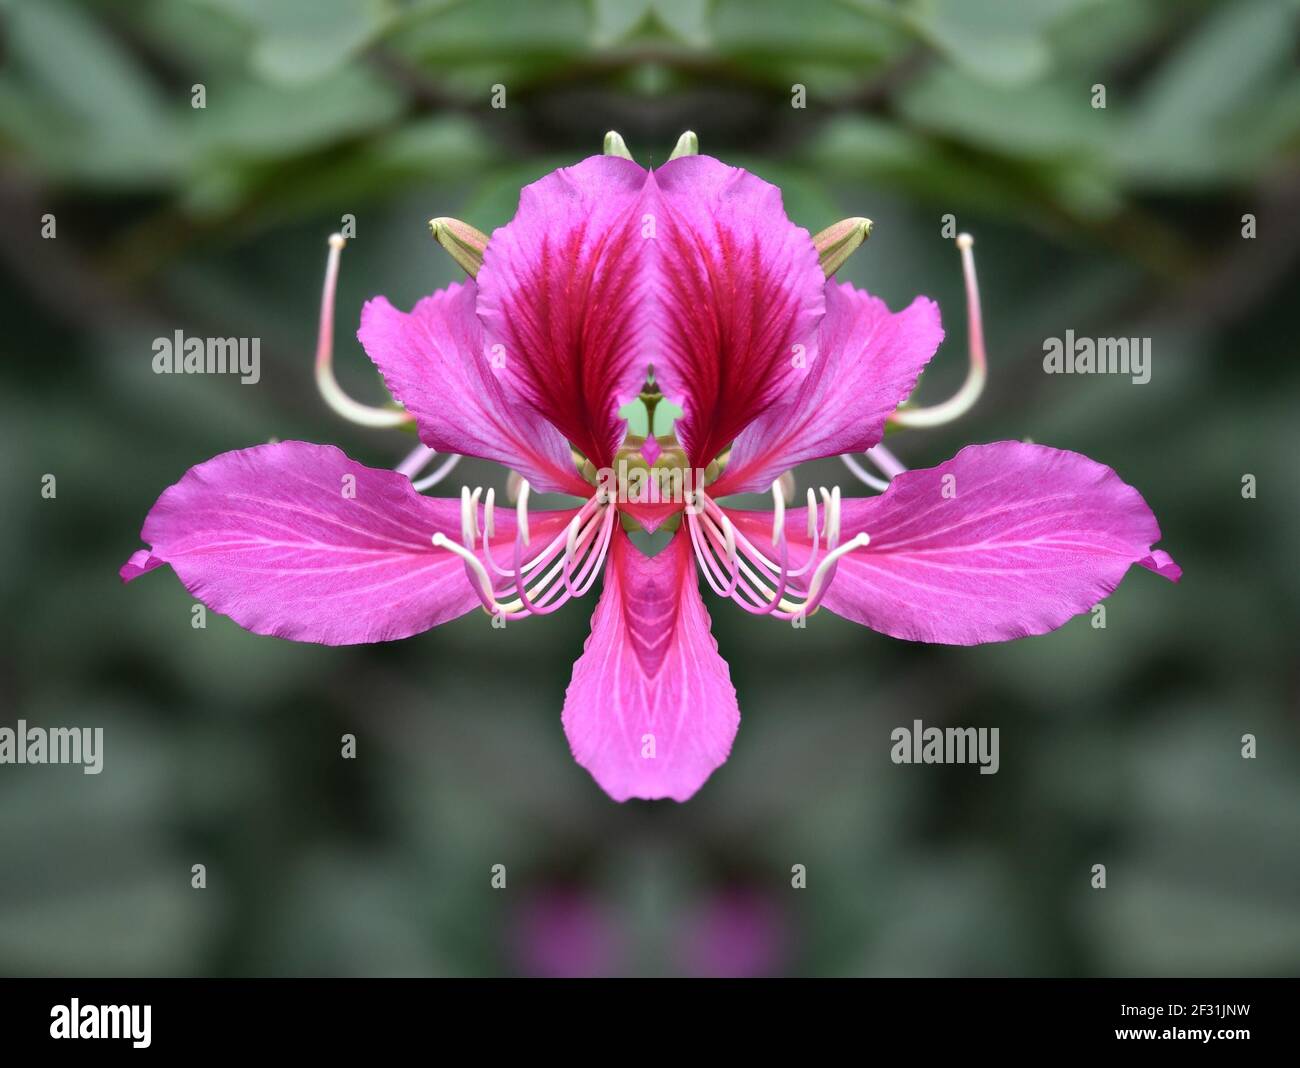 Incarvillea arguta an exotic orchid-like Bauhinia flower with pink petals on a natural green background. Stock Photo